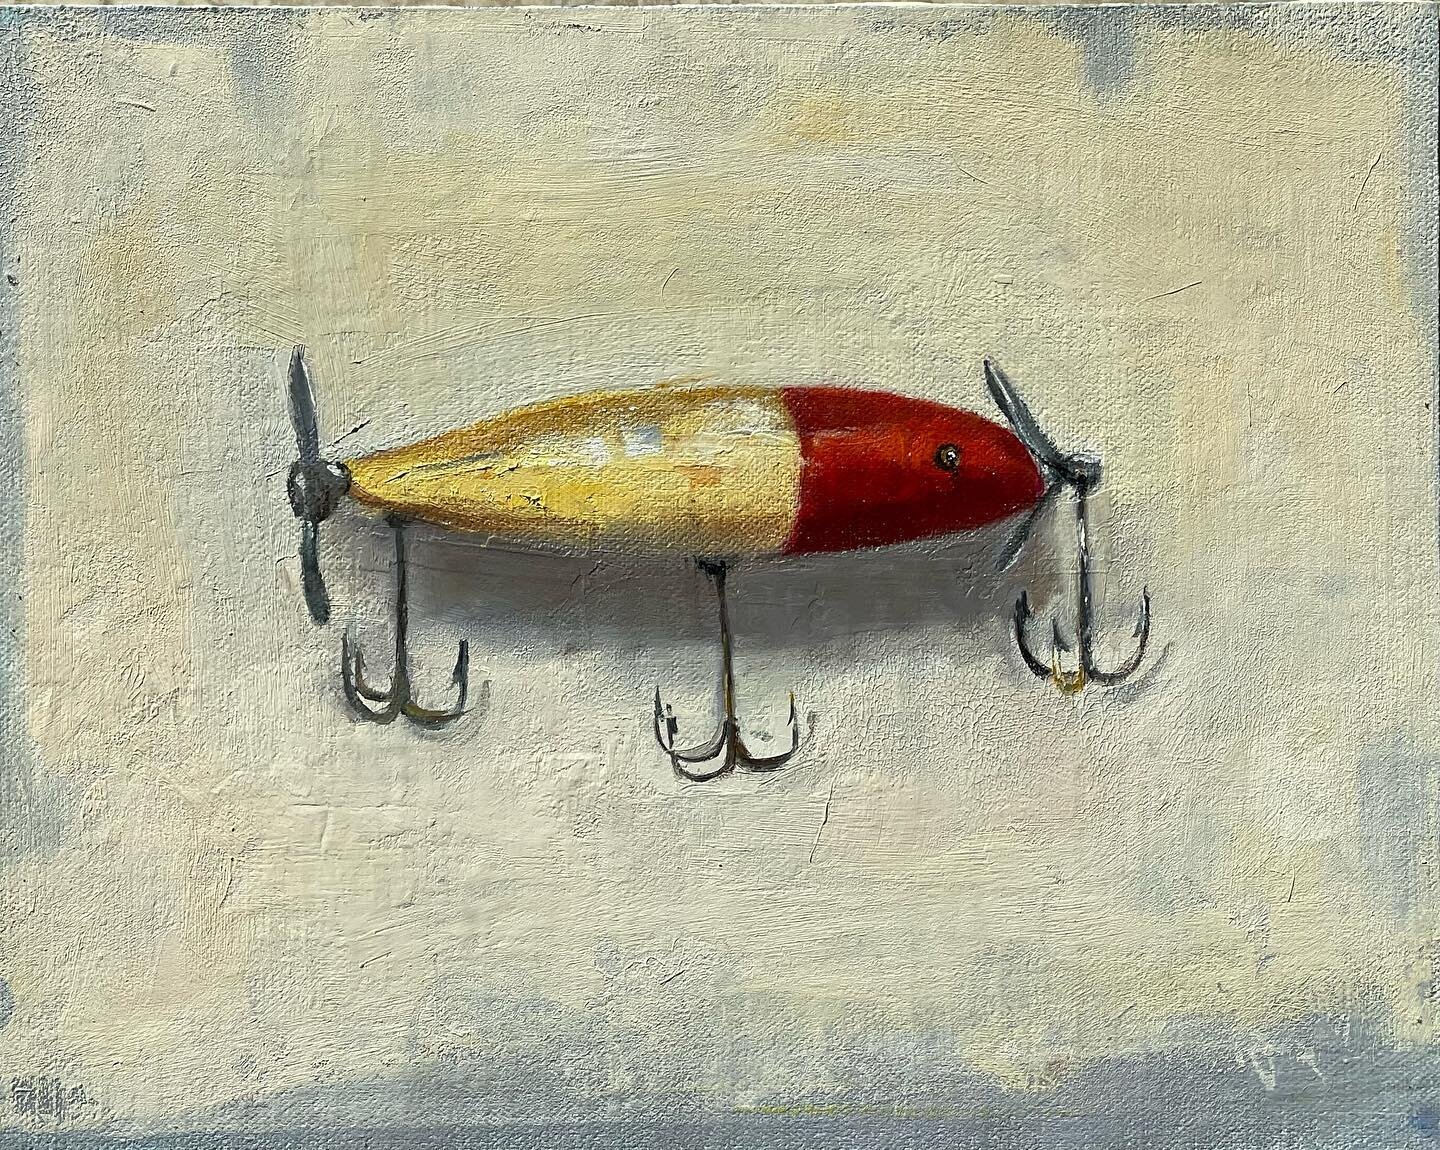 It&rsquo;s been an entire year or maybe even more that this little vintage &lsquo;minnow&rsquo;fishing lure has been kicking around the  studio. When I&rsquo;m stuck I&rsquo;ll fool around with a discarded painting. Circling the wagons. Reworking, re